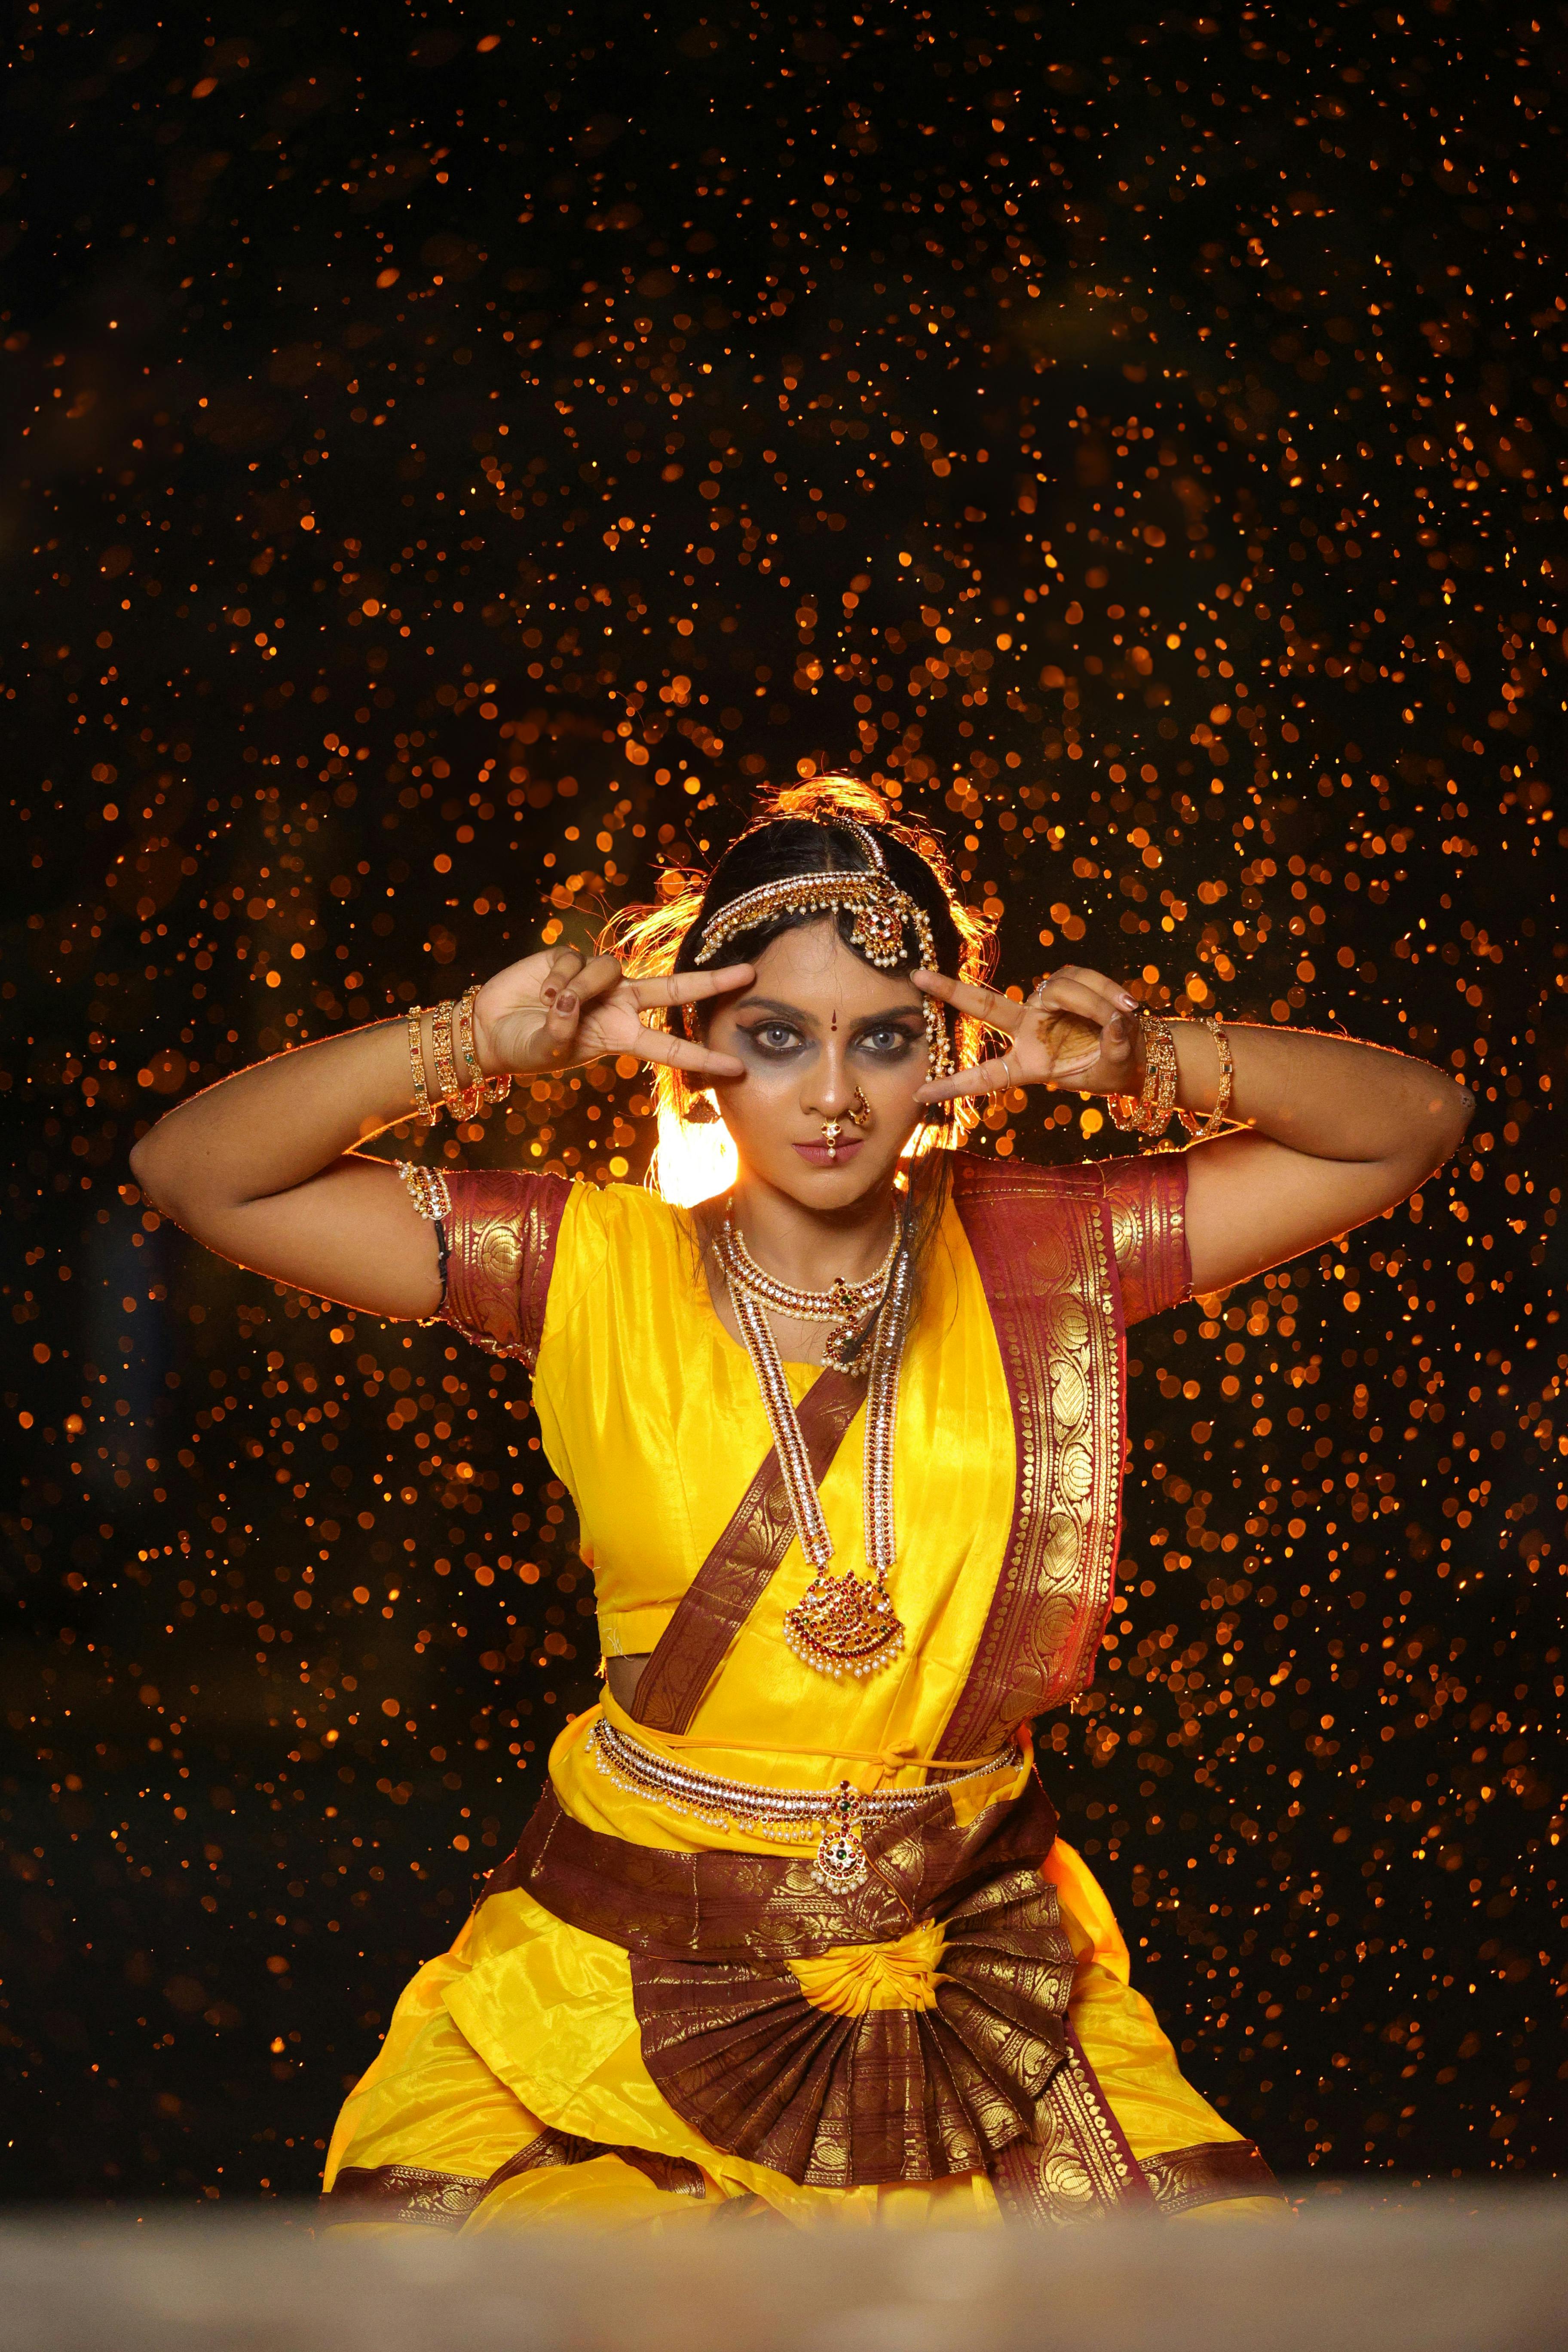 Portrait of an Indian Classical Dancer Posing at Temple Stock Image - Image  of architecture, girl: 194113033